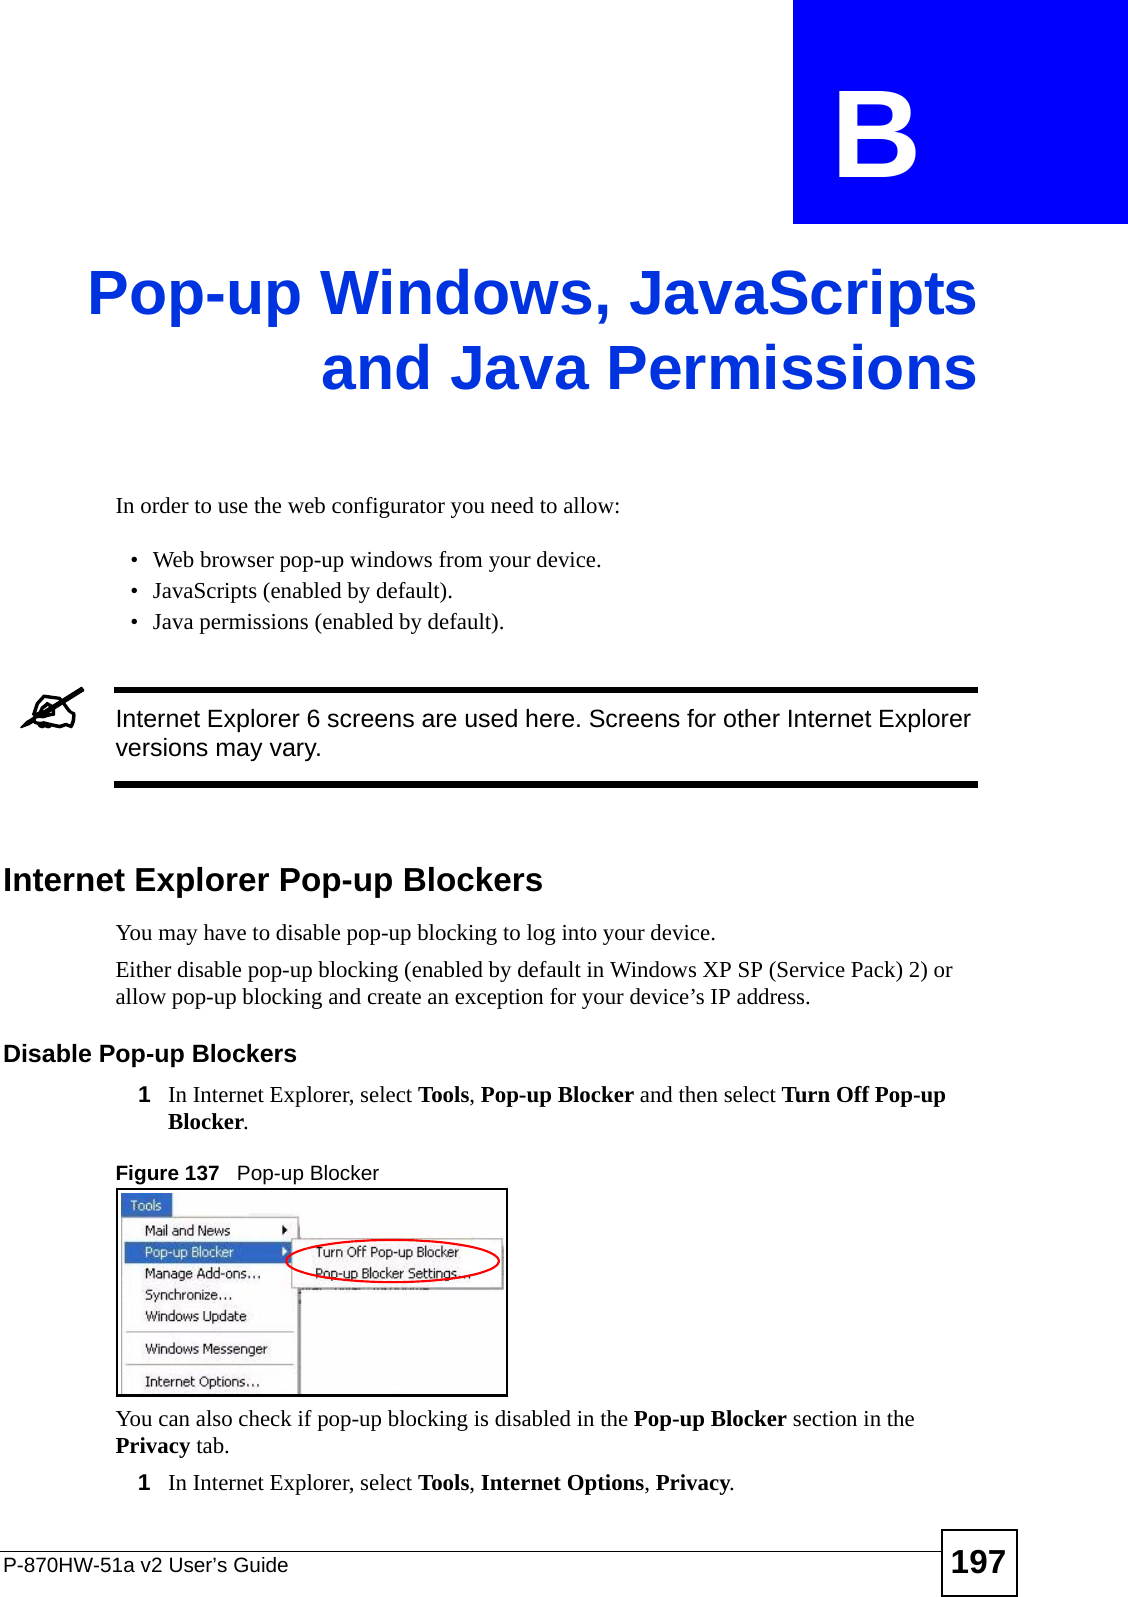 P-870HW-51a v2 User’s Guide 197APPENDIX  B Pop-up Windows, JavaScriptsand Java PermissionsIn order to use the web configurator you need to allow:• Web browser pop-up windows from your device.• JavaScripts (enabled by default).• Java permissions (enabled by default).&quot;Internet Explorer 6 screens are used here. Screens for other Internet Explorer versions may vary.Internet Explorer Pop-up BlockersYou may have to disable pop-up blocking to log into your device. Either disable pop-up blocking (enabled by default in Windows XP SP (Service Pack) 2) or allow pop-up blocking and create an exception for your device’s IP address.Disable Pop-up Blockers1In Internet Explorer, select Tools, Pop-up Blocker and then select Turn Off Pop-up Blocker. Figure 137   Pop-up BlockerYou can also check if pop-up blocking is disabled in the Pop-up Blocker section in the Privacy tab. 1In Internet Explorer, select Tools, Internet Options, Privacy.